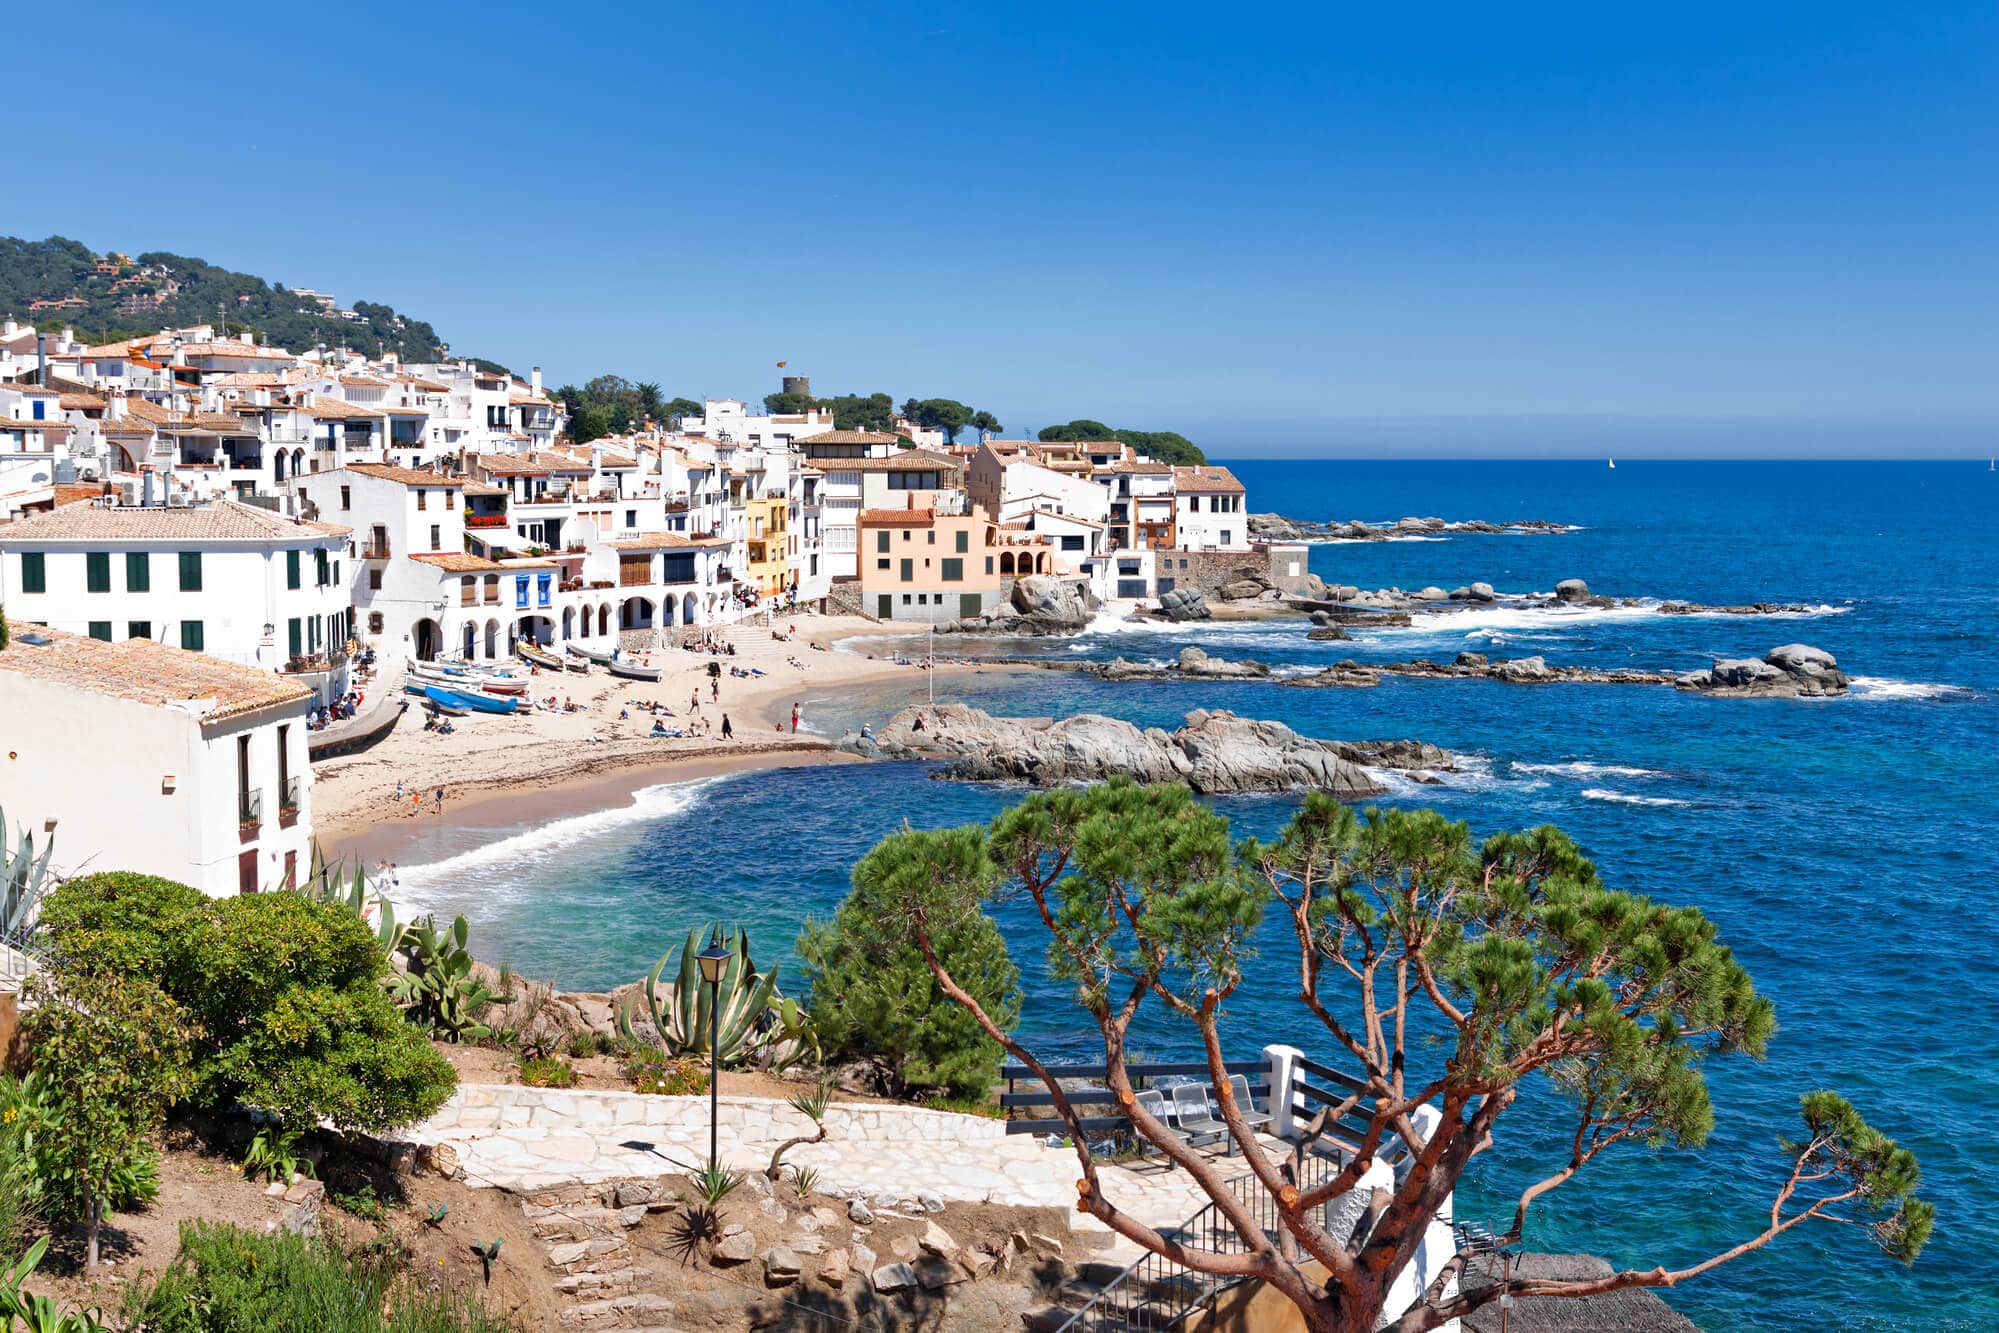 View of the beaches and white houses of Calella de Palafrugell on a sunny, clear day - One of the prettiest towns and hidden gem in Spain